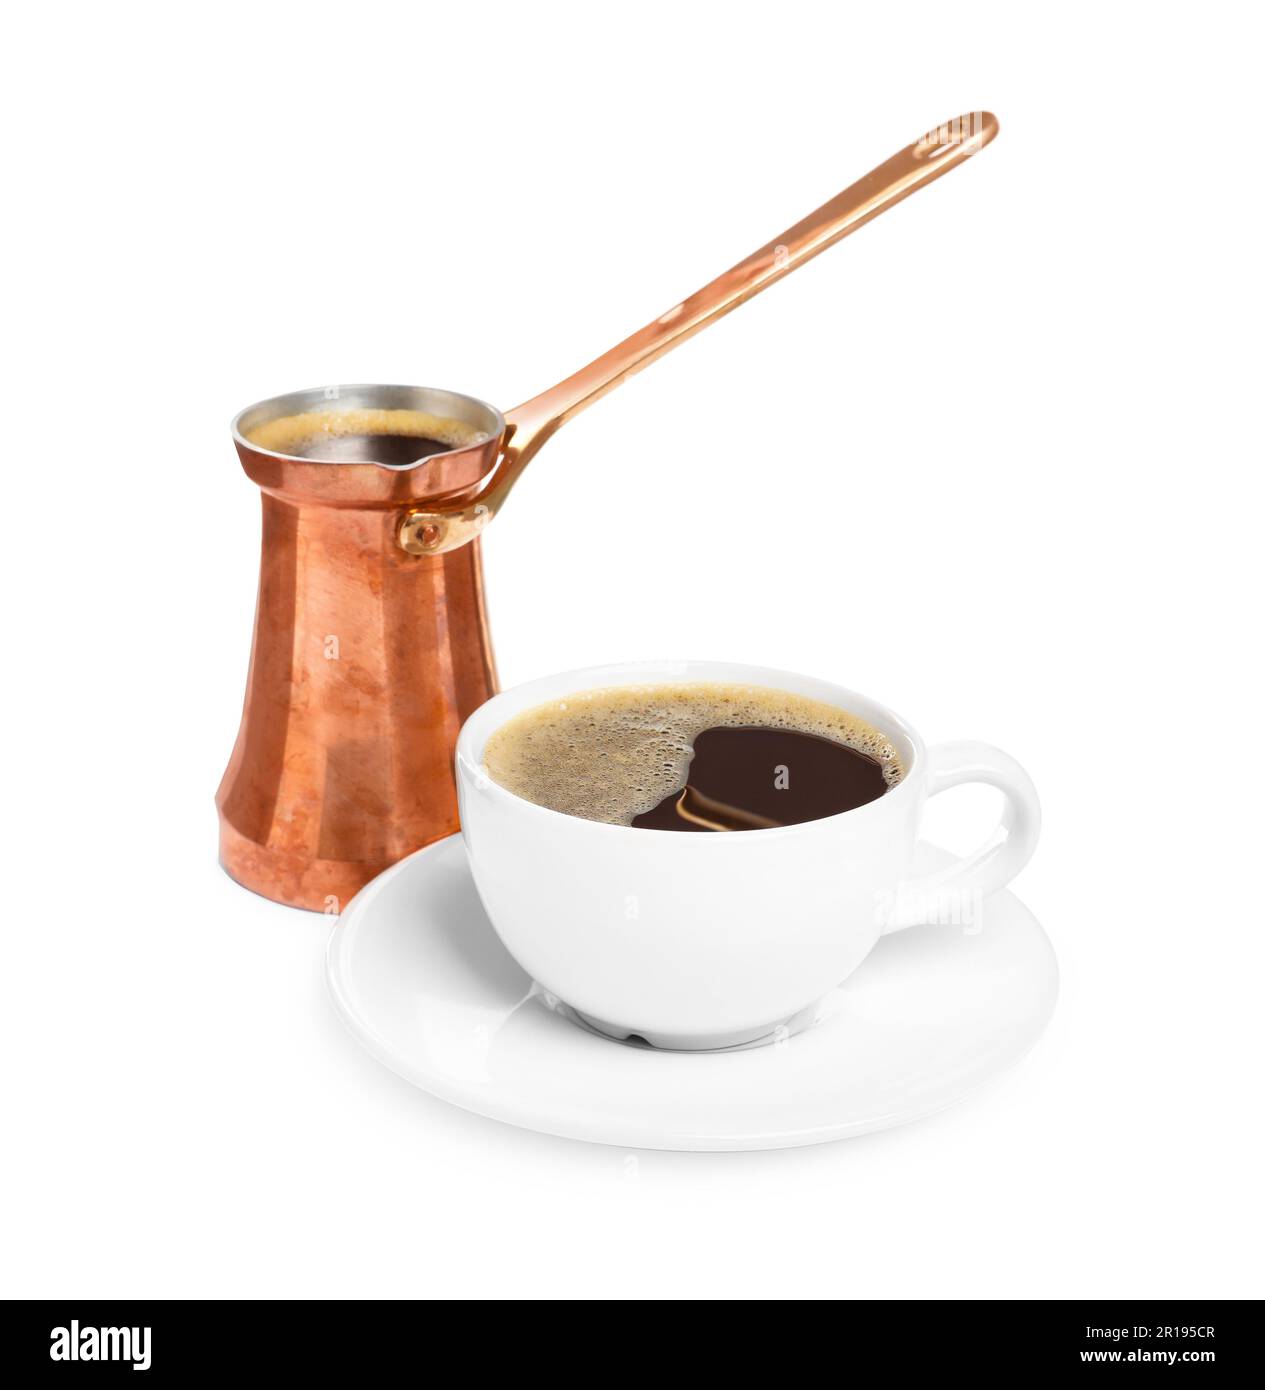 https://c8.alamy.com/comp/2R195CR/copper-turkish-coffee-pot-and-cup-of-hot-drink-on-white-background-2R195CR.jpg